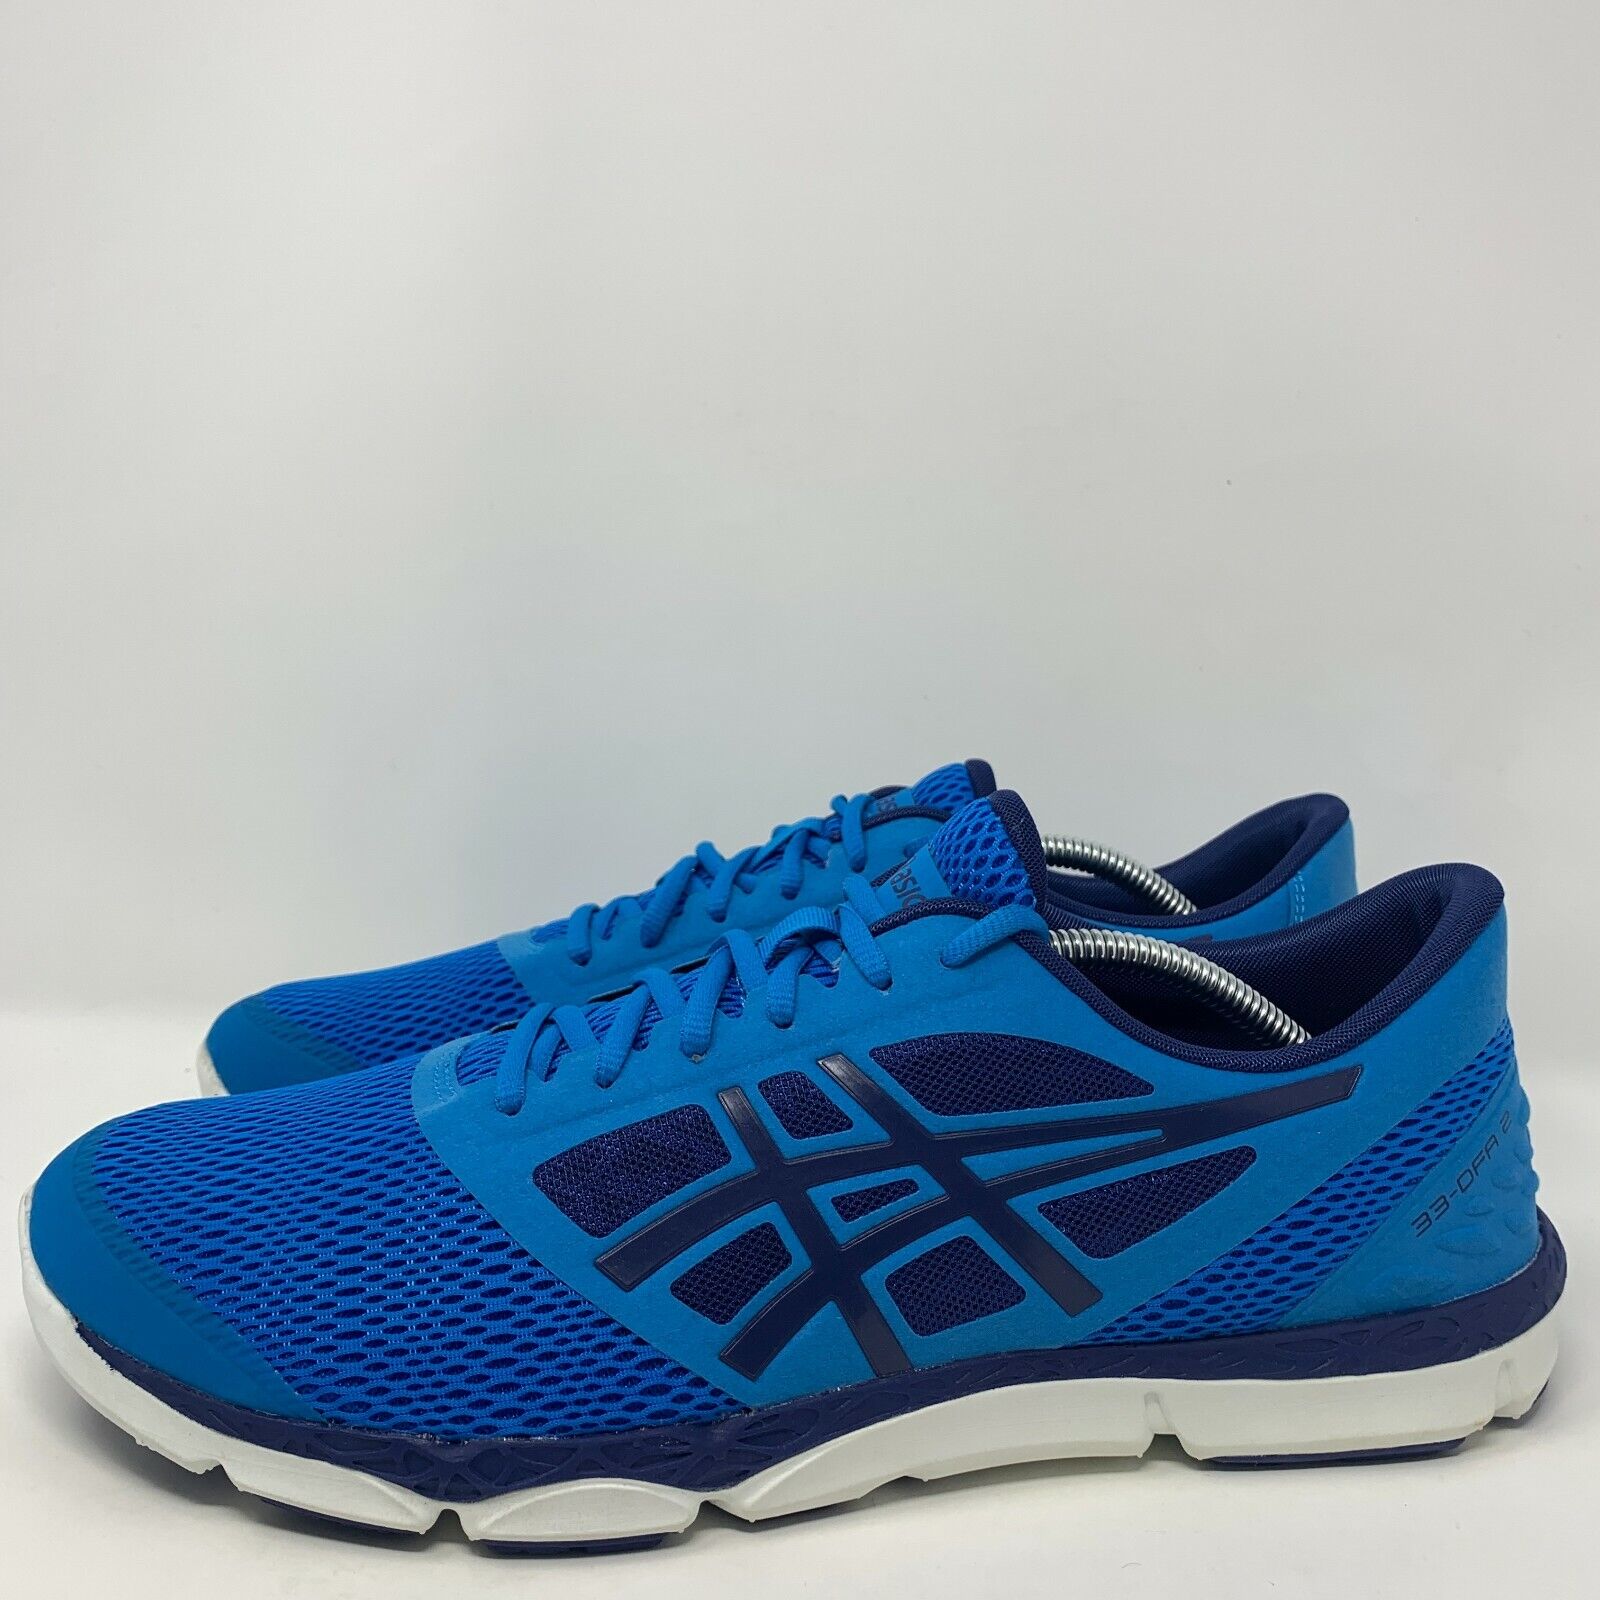 33 DFA 2 Running Shoes Mens Size 12.5 Blue Athletic Sneakers | eBay